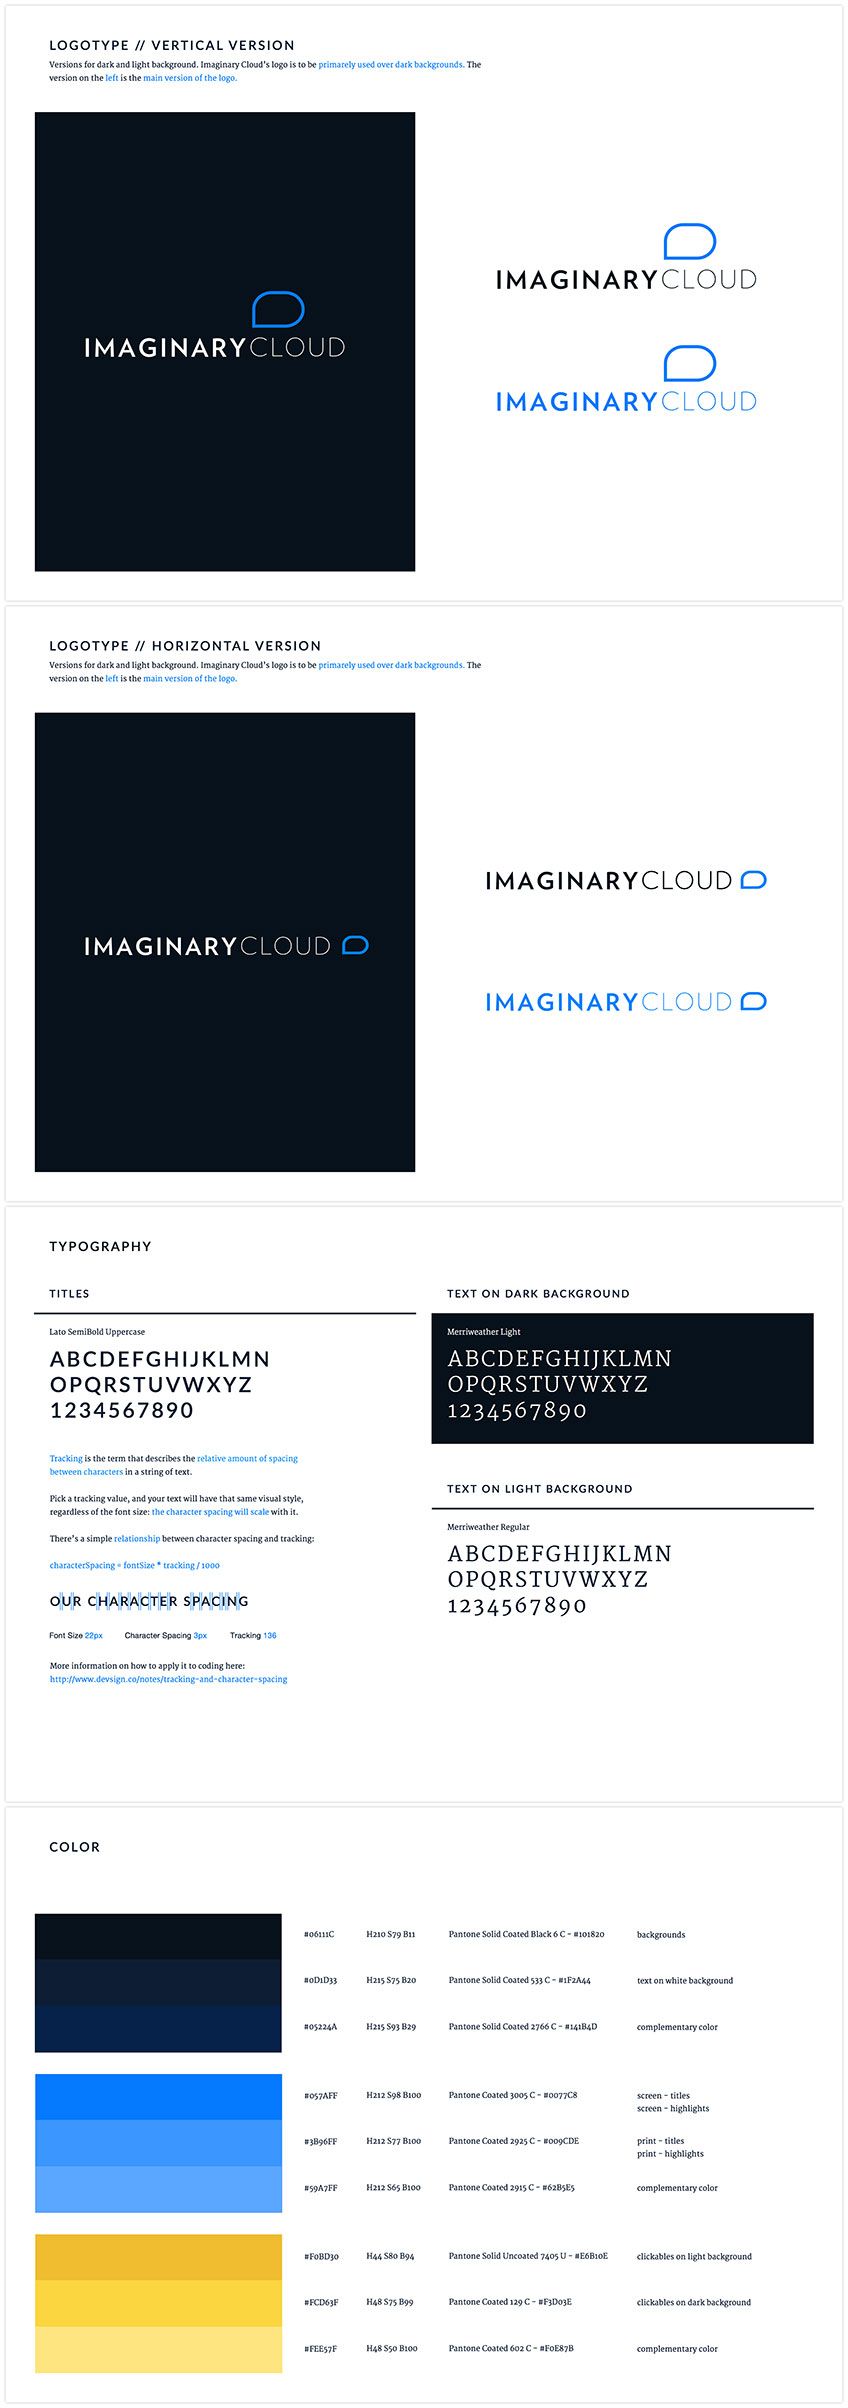 IMAGINARY CLOUD GUIDELINES